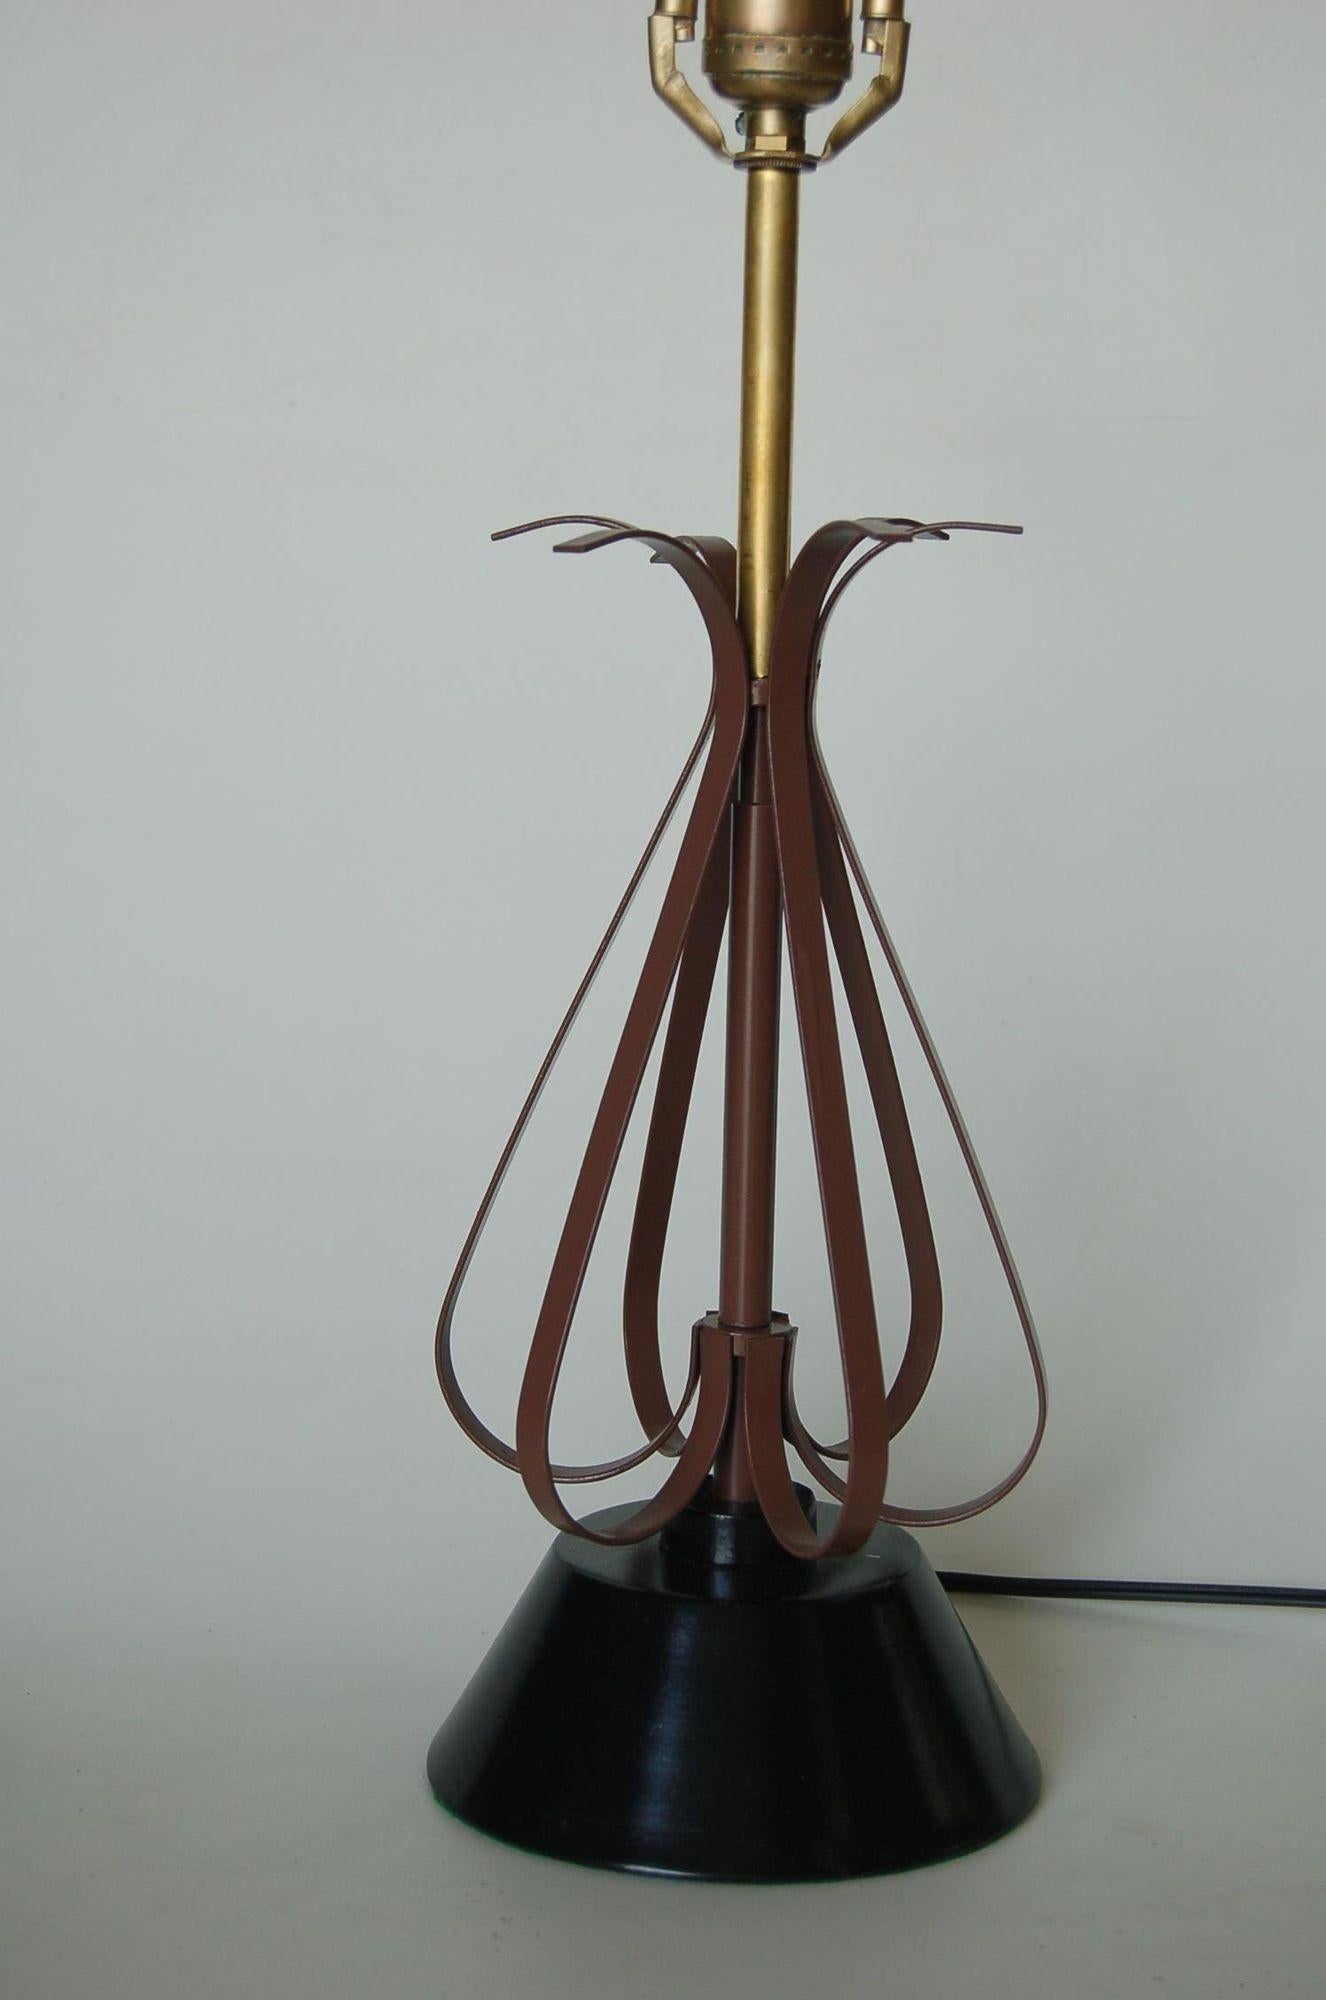 Midcentury scalloped metal table lamp in brown and black table lamp.

Measures: 18